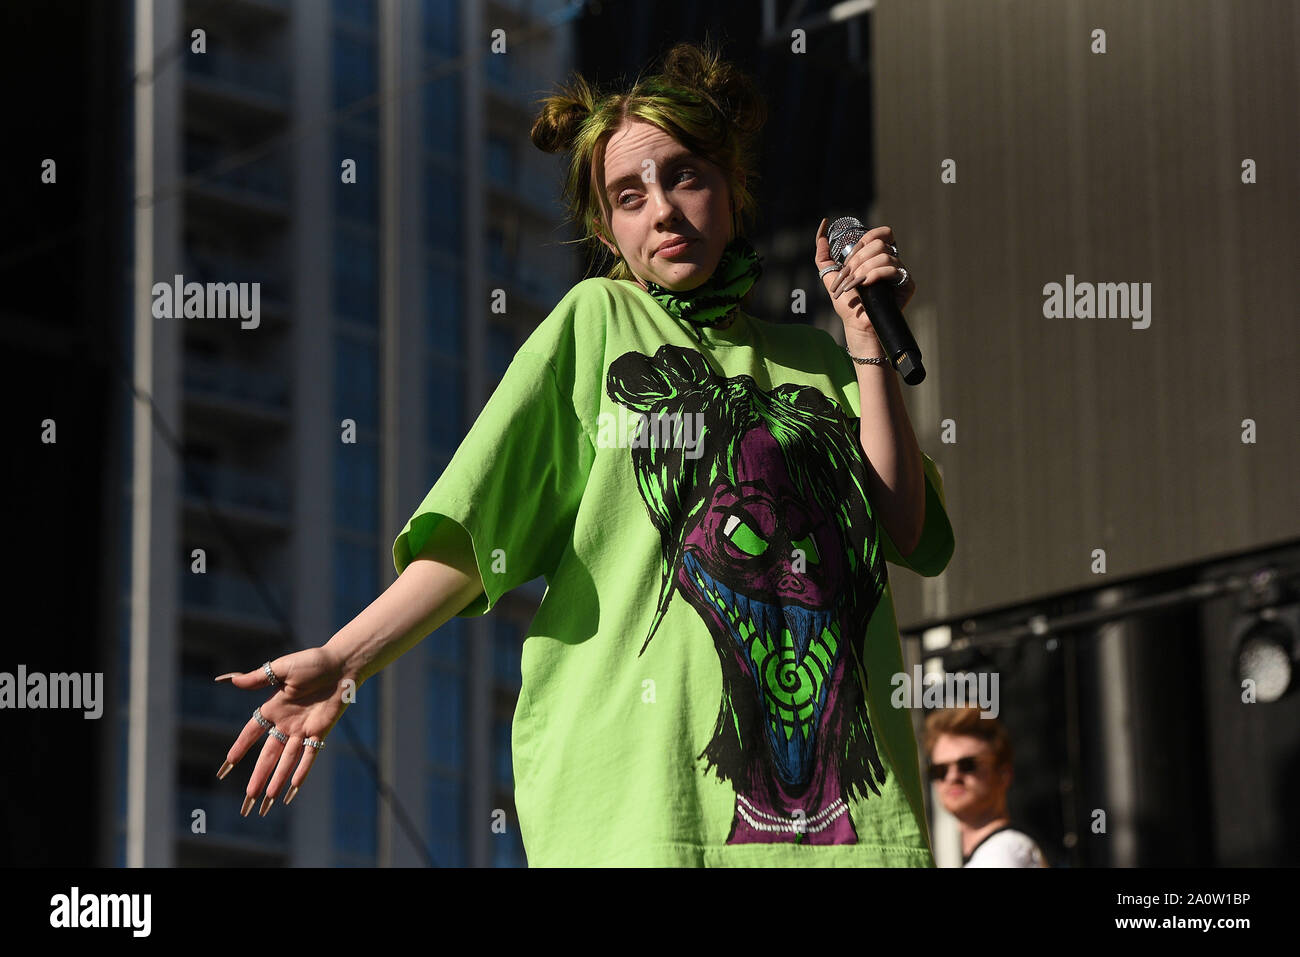 LAS VEGAS, NEVADA - SEPTEMBER 21: Billie Eilish performs onstage during the Daytime Stage at the 2019 iHeartRadio Music Festival held at the Las Vegas Festival Grounds on September 21, 2019 in Las Vegas, Nevada. Photo: imageSPACE/MediaPunch Stock Photo